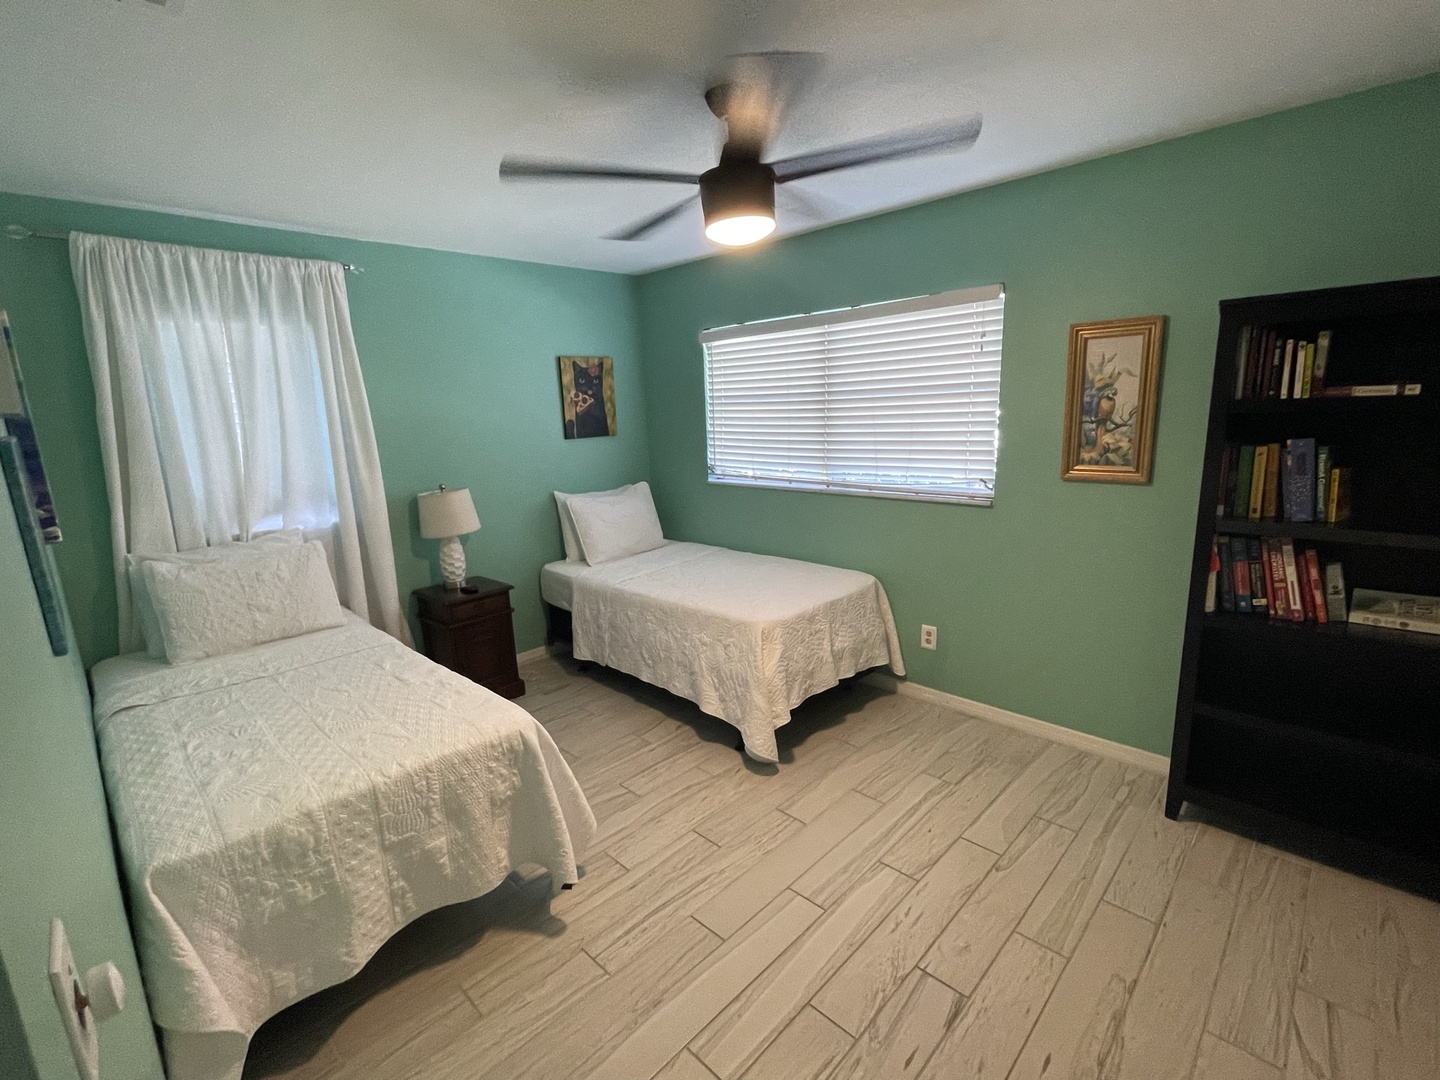 The second bedroom includes a pair of cozy twin beds & ceiling fan